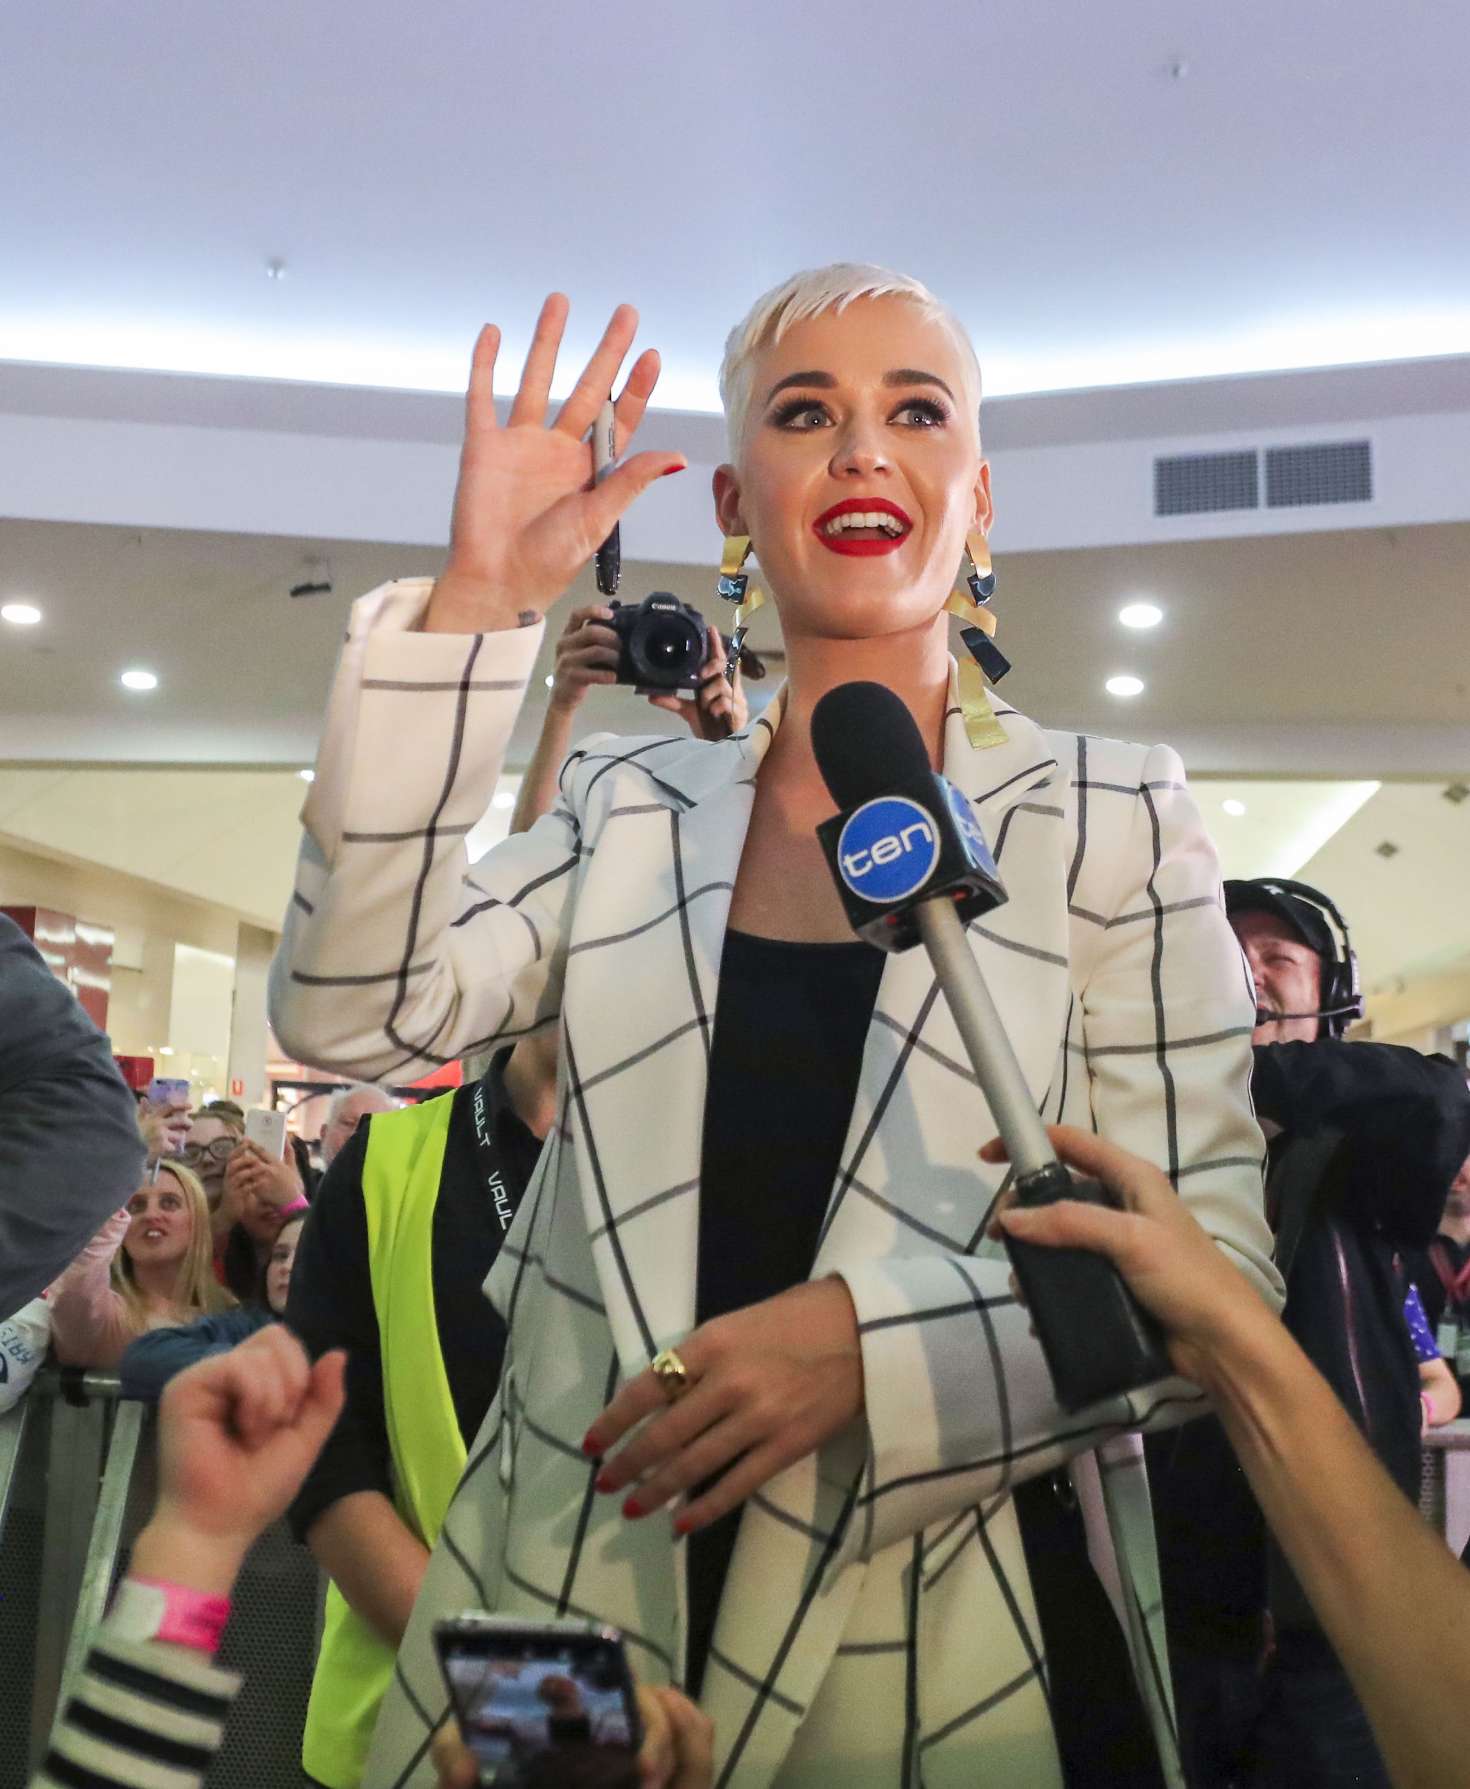 Katy Perry at a Westfield appearance in Perth